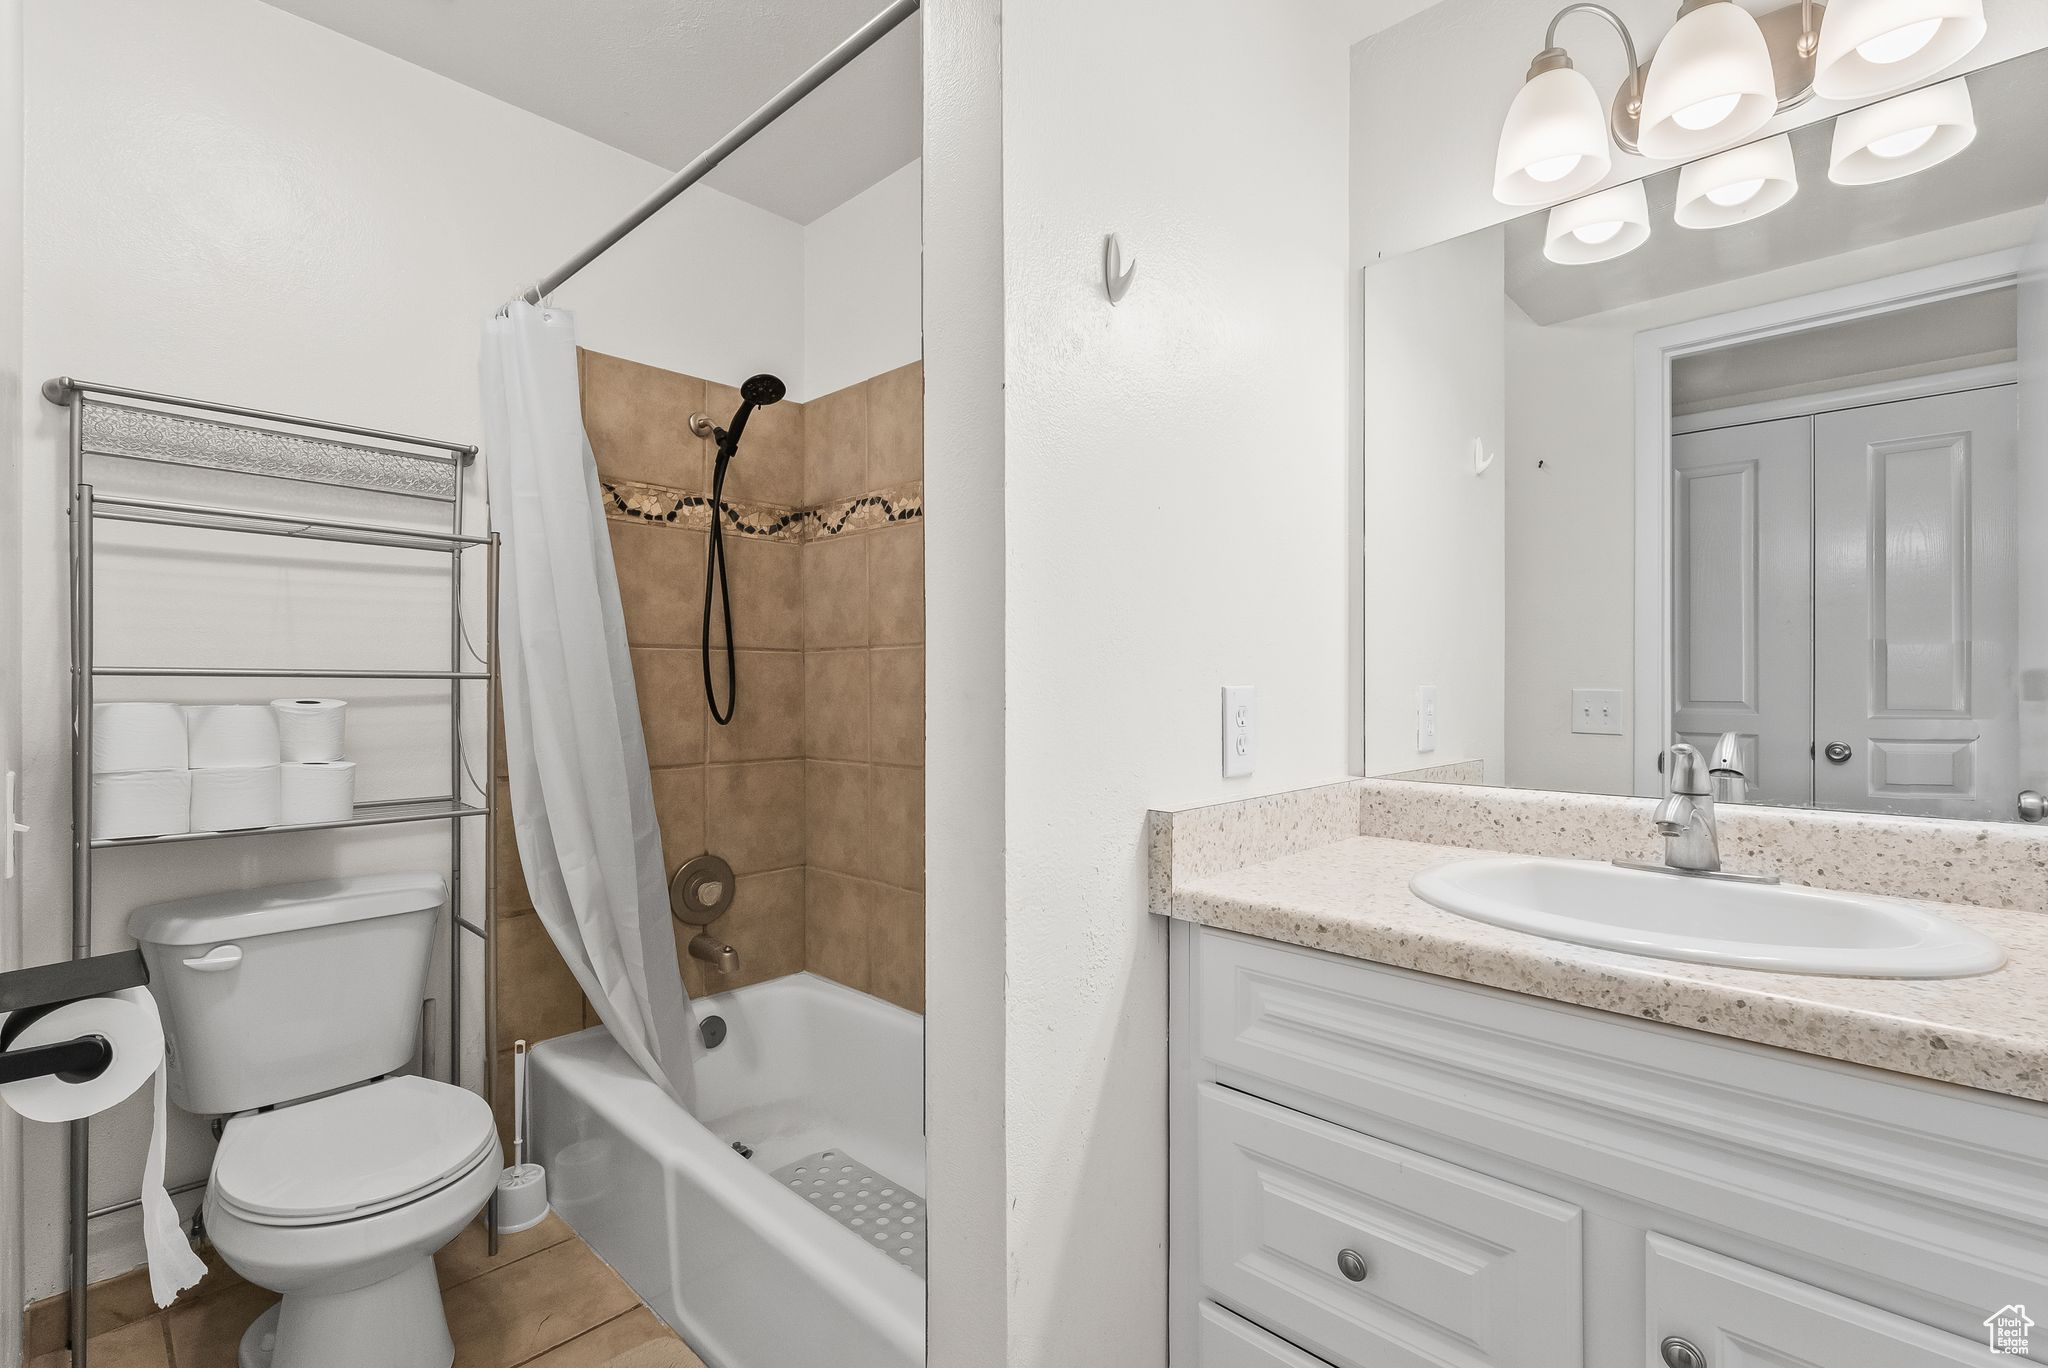 Full bathroom with shower / tub combo with curtain, vanity, tile floors, and toilet